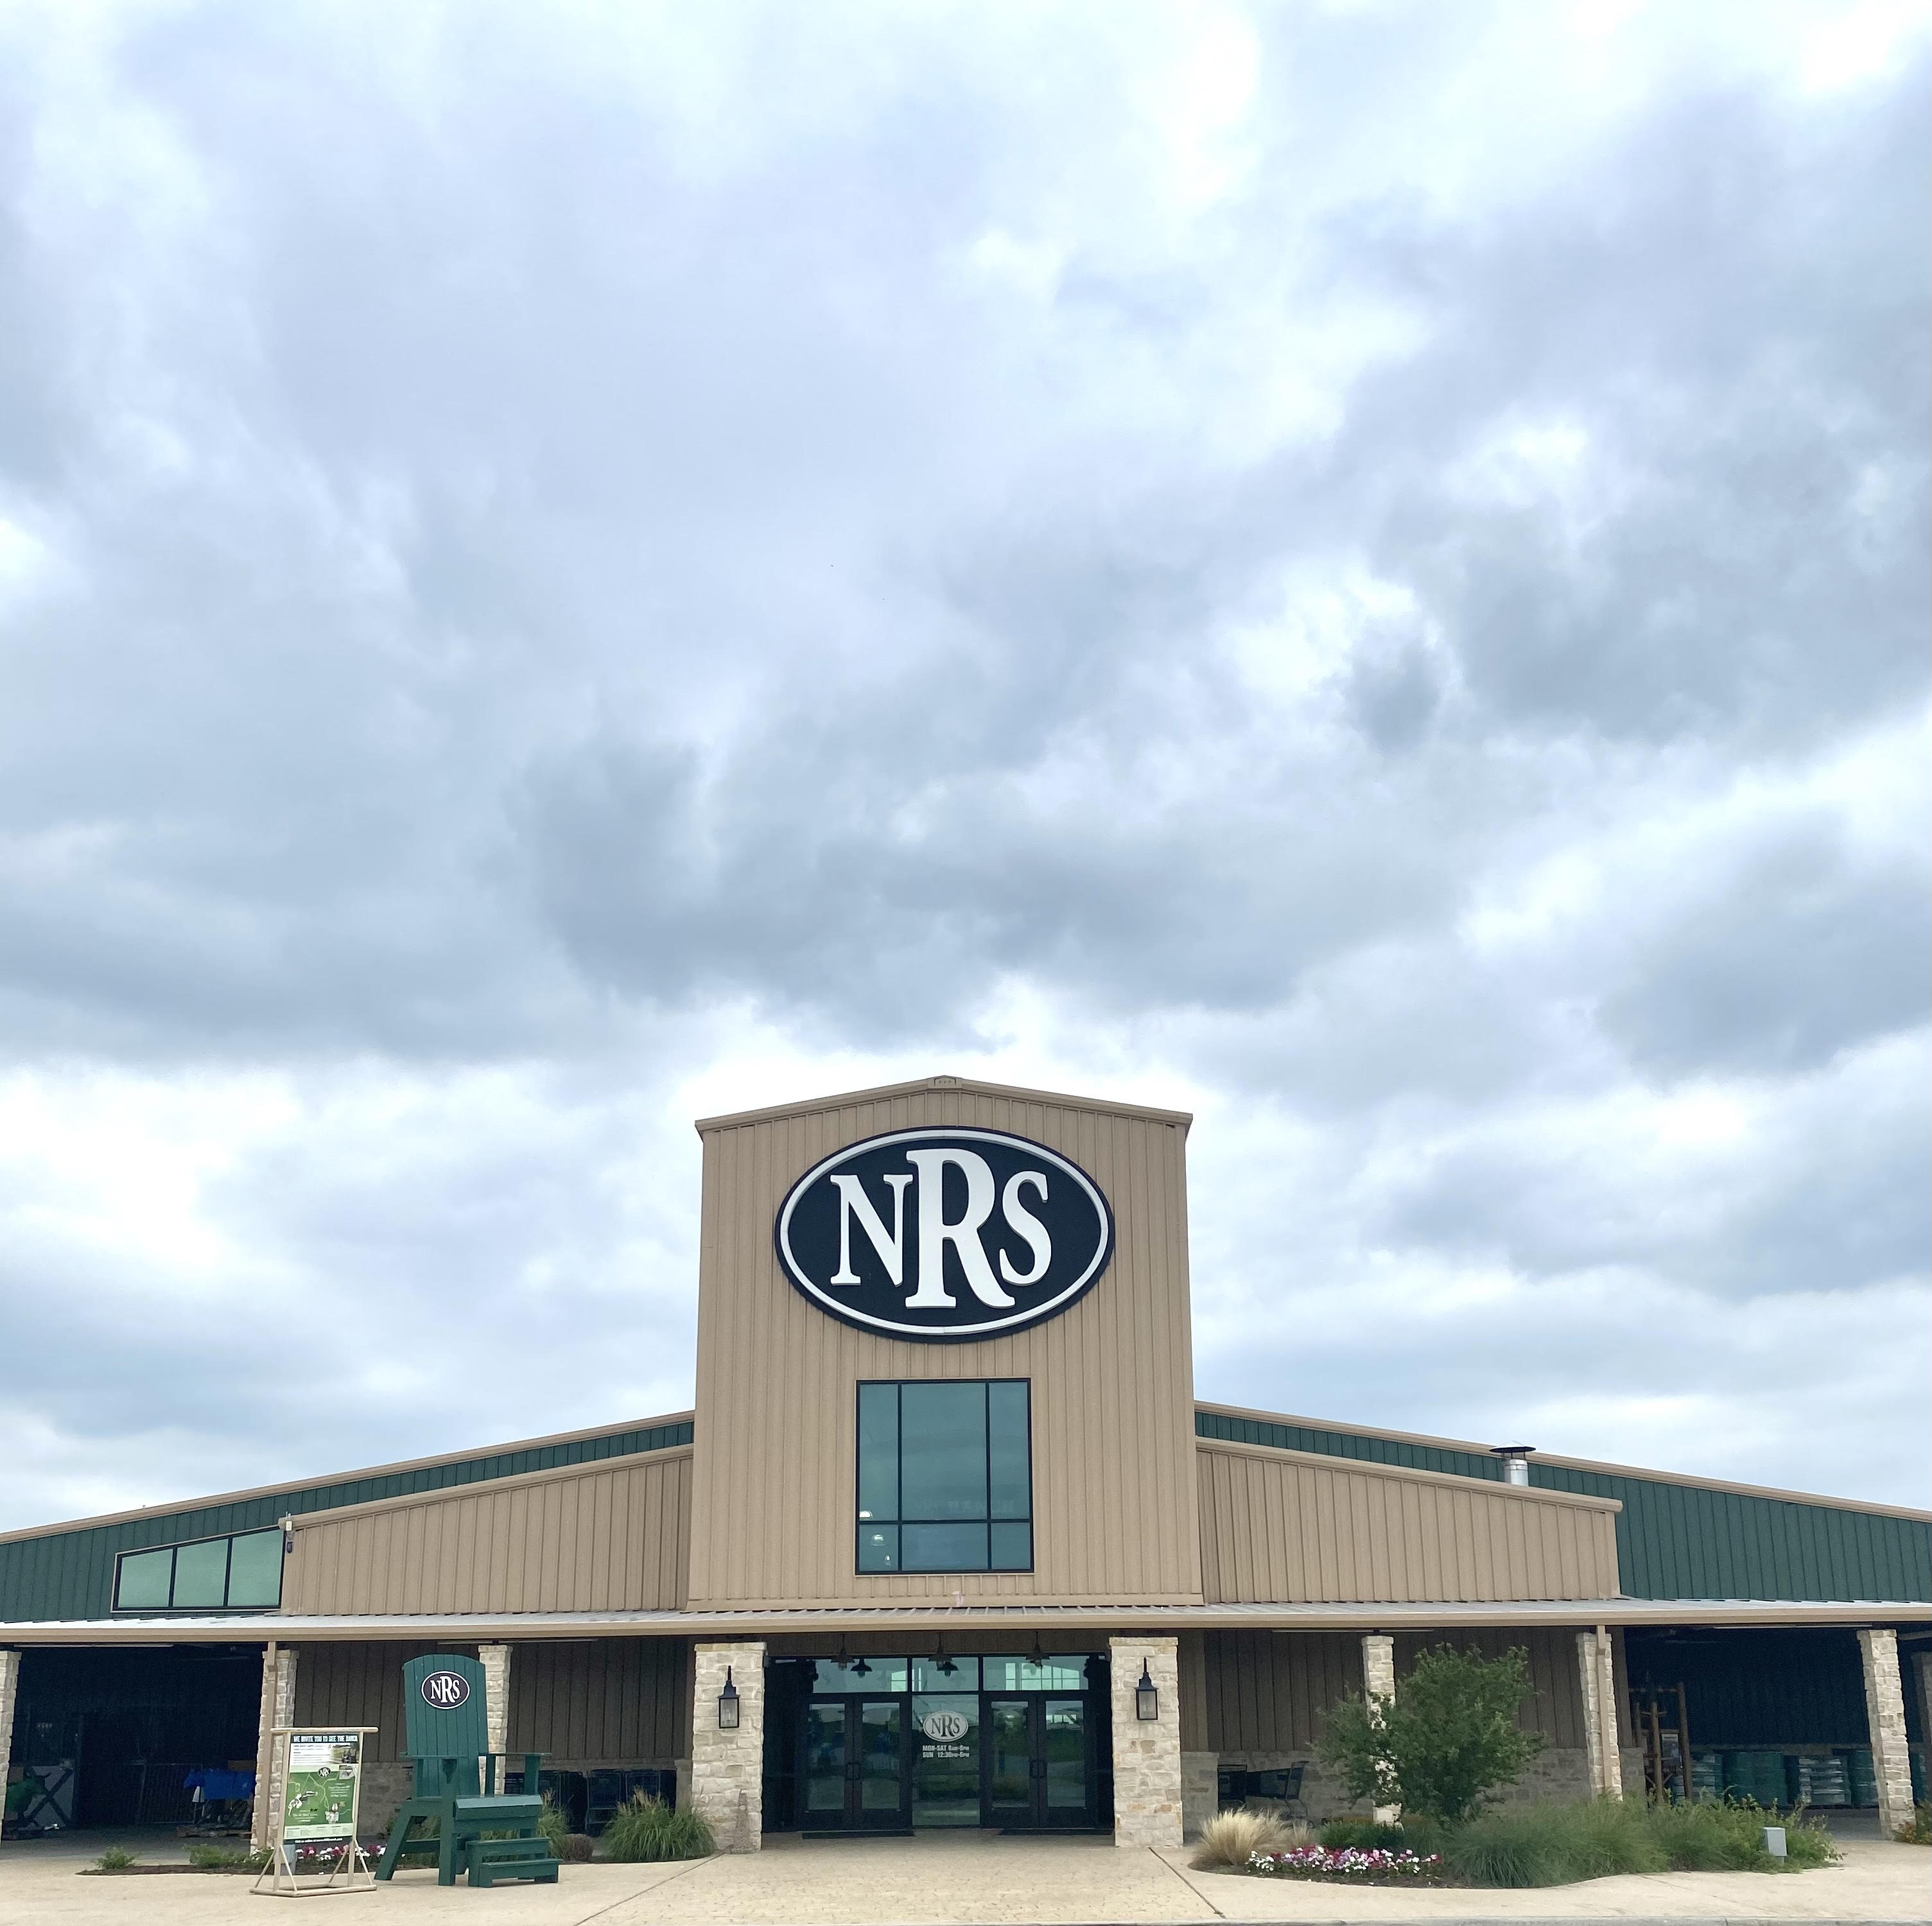 NRS western store located in Decatur Texas. Tack, saddles, western wear, boots, jeans, toys, cowboy hats. If you are visiting for the Fort Worth  Stock Show and Rodeo, this store is worth the trip. 